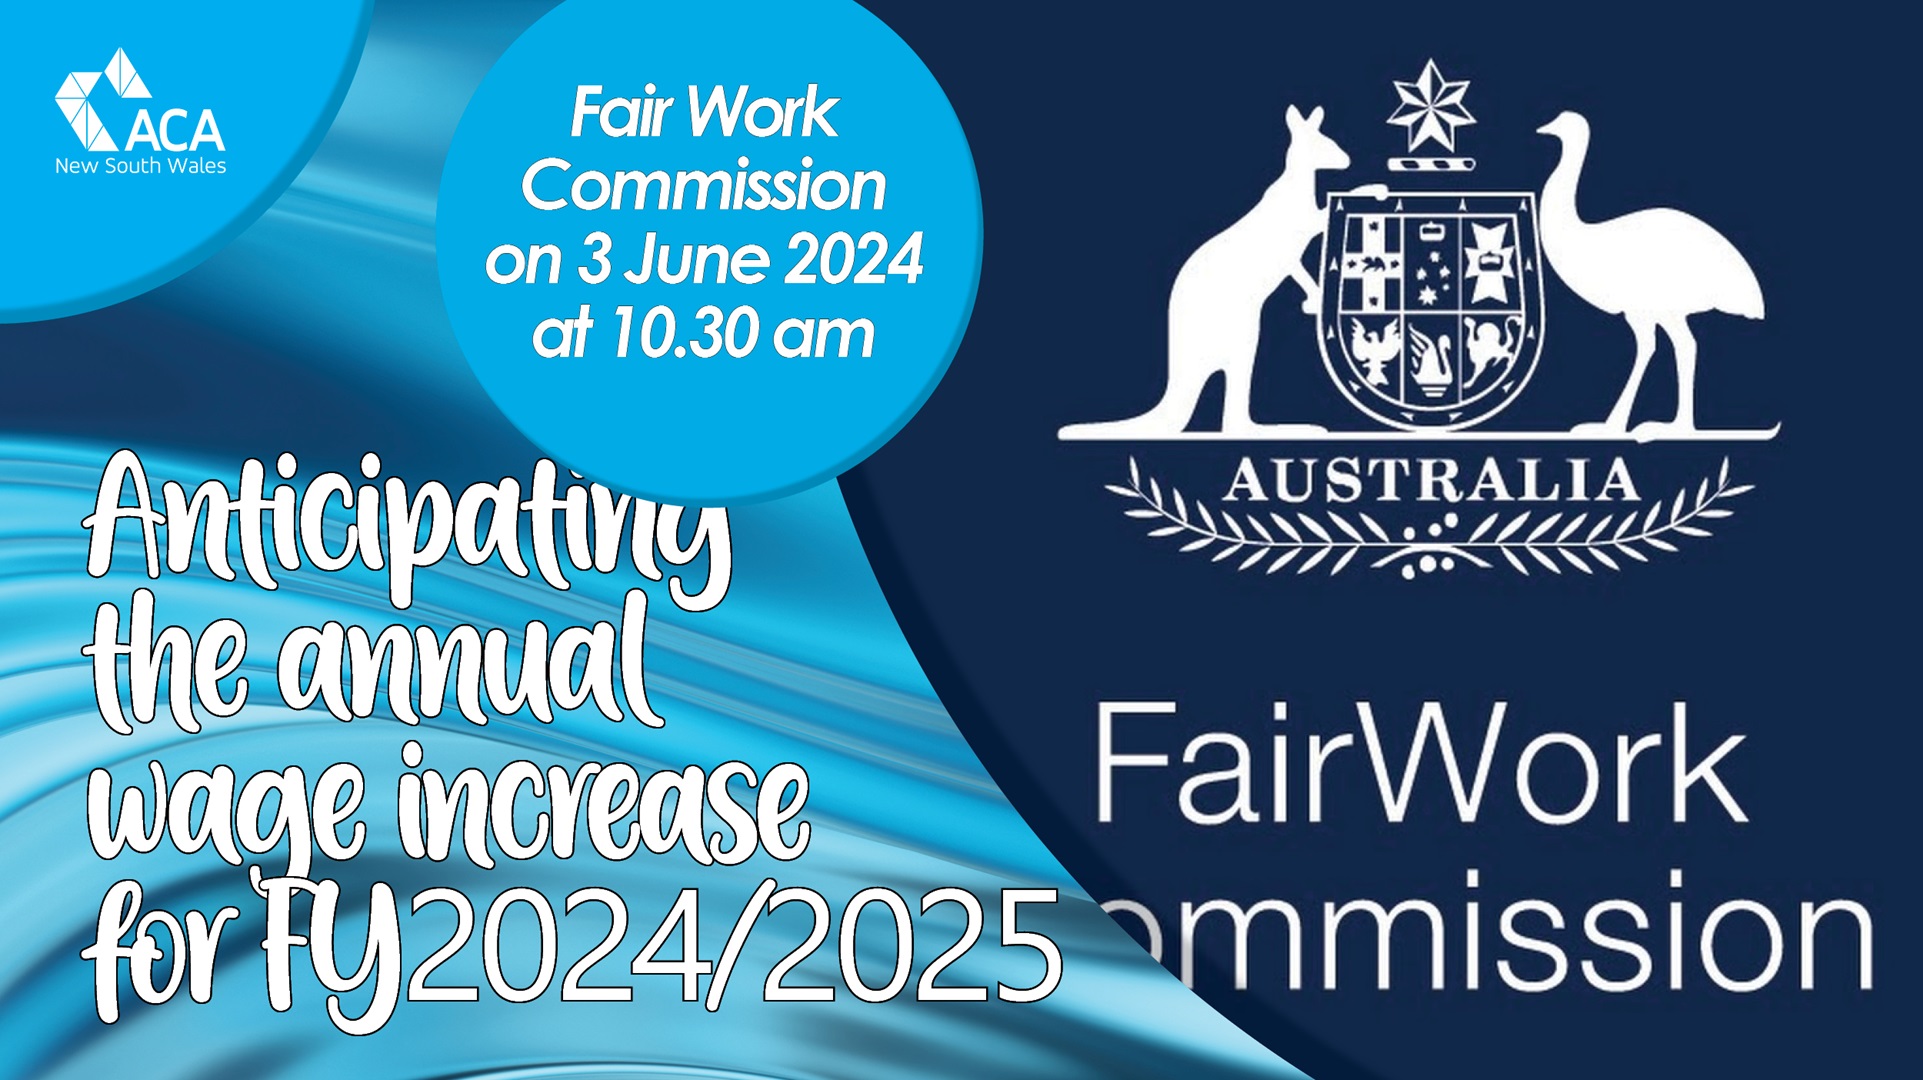 Annual wage increase(s) to be announced on Monday, 3 June 2024